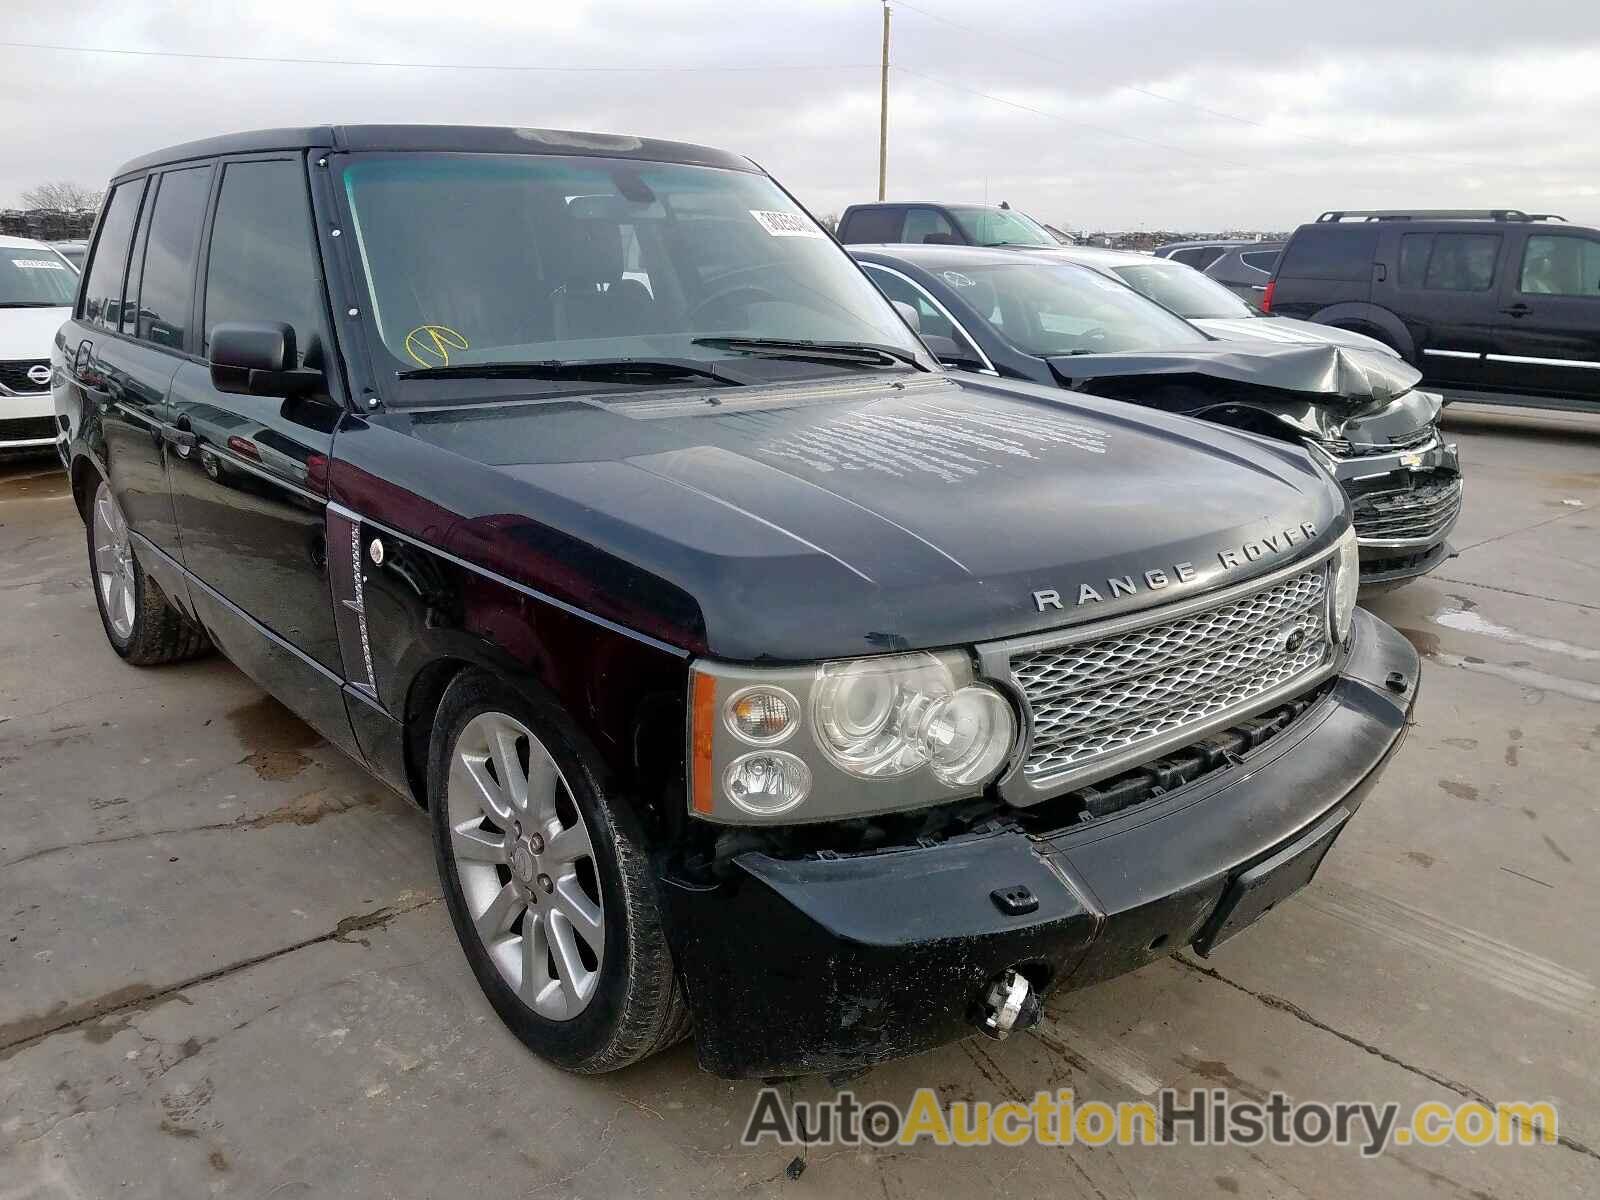 2008 LAND ROVER RANGE ROVE SUPERCHARGED, SALMF13468A276833